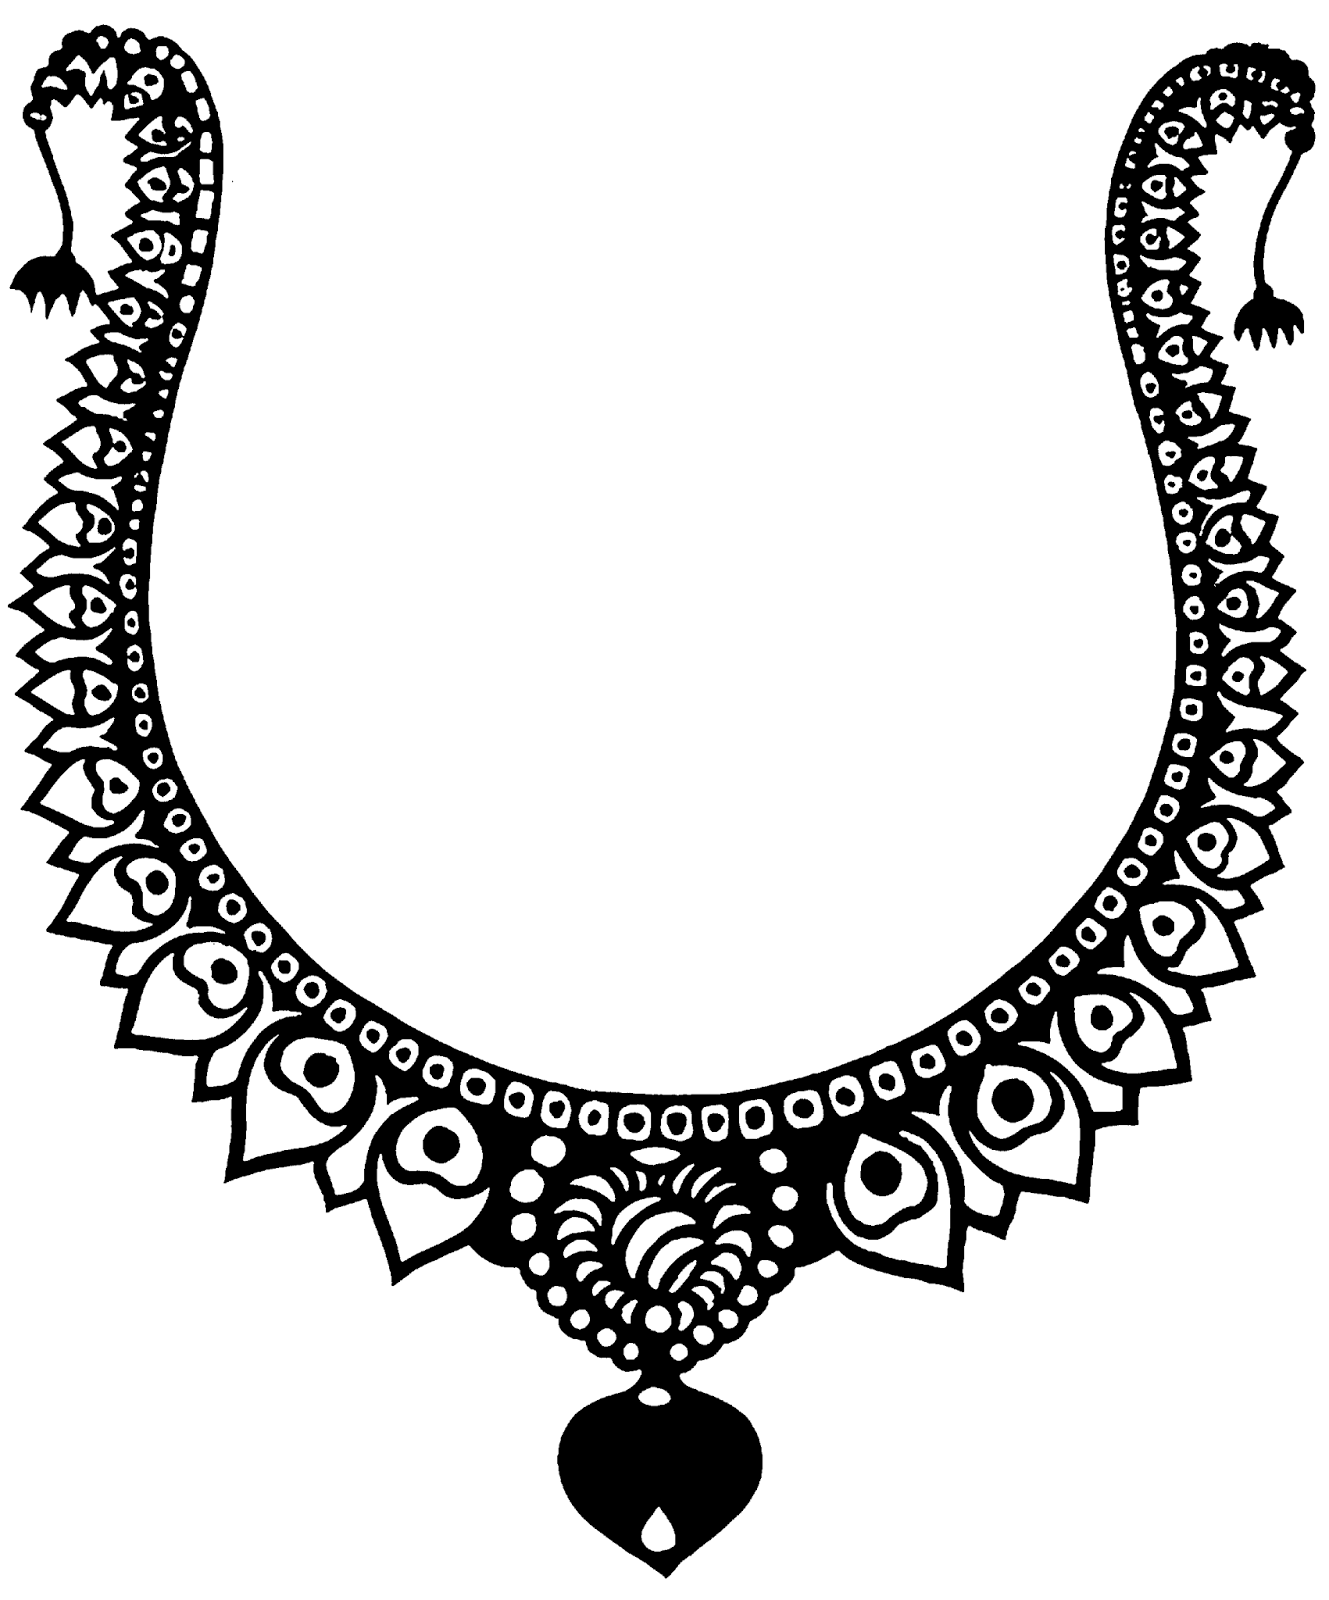 Jewellery clipart black and white